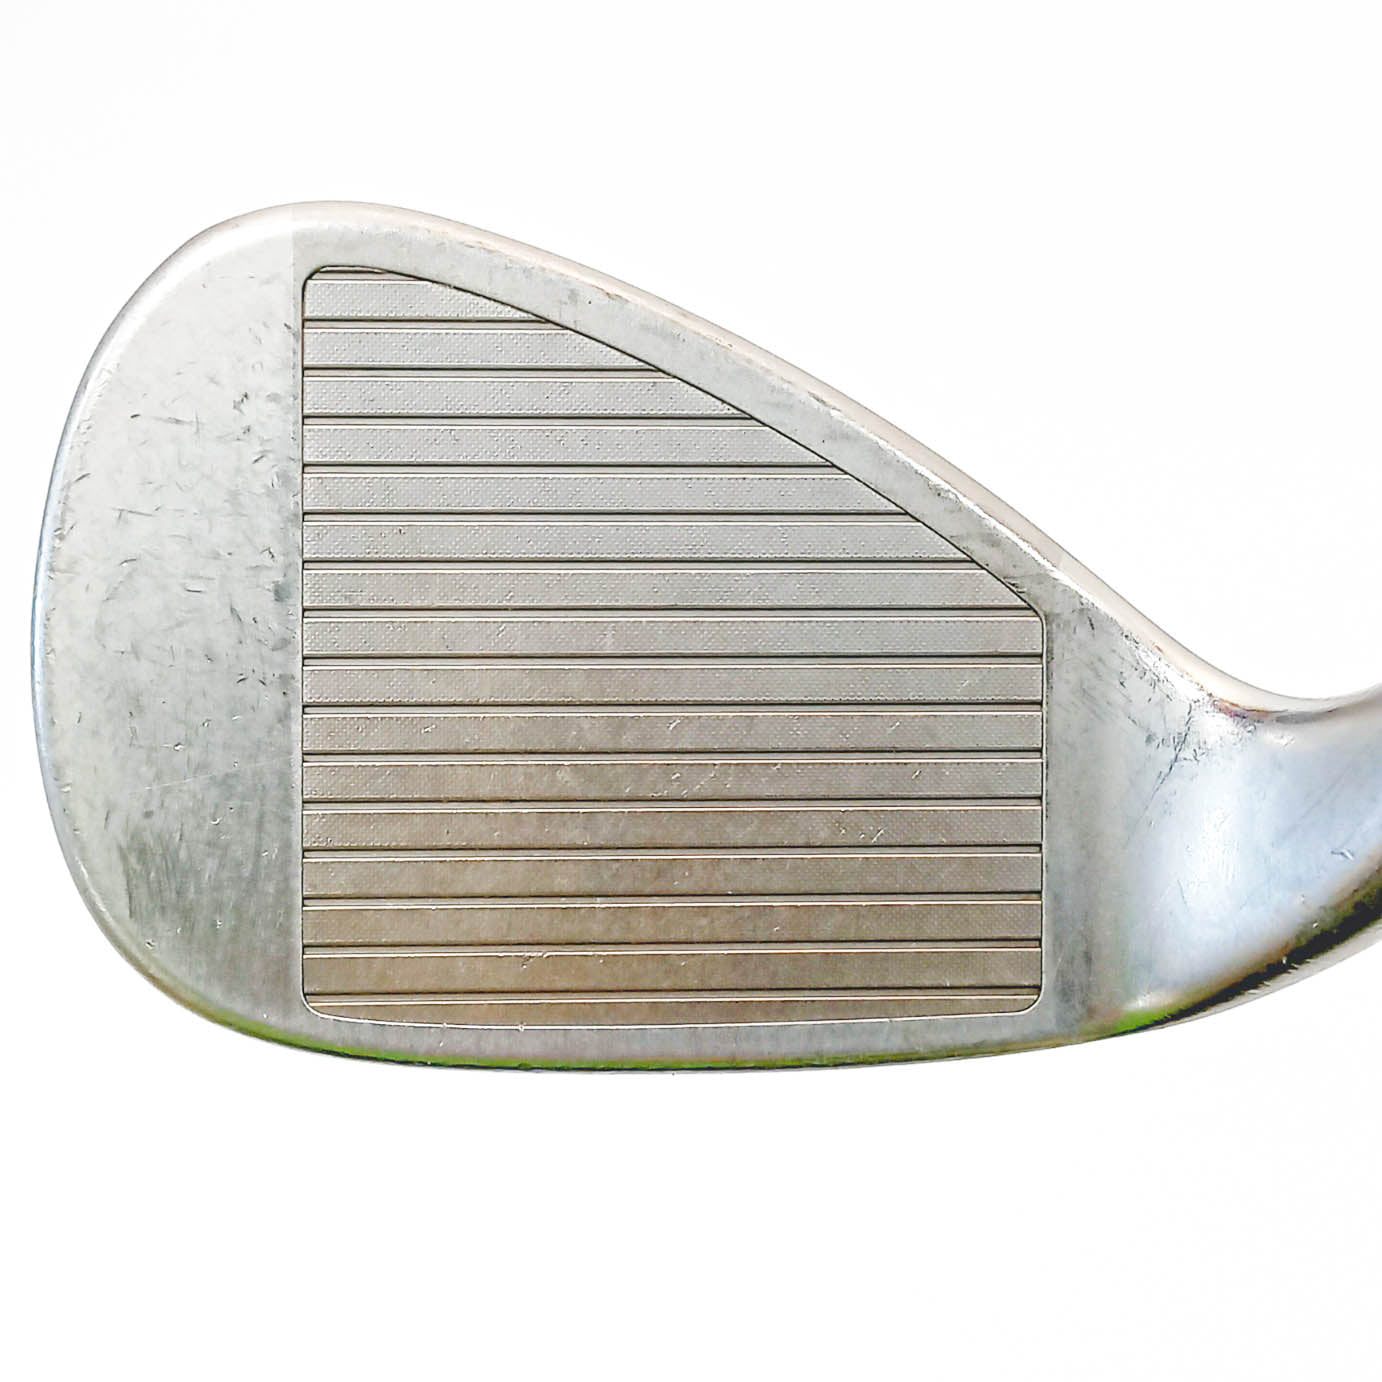 Taylor Made TOUR PREFERRED EF SPIN GROOVE 52/09 DG S200